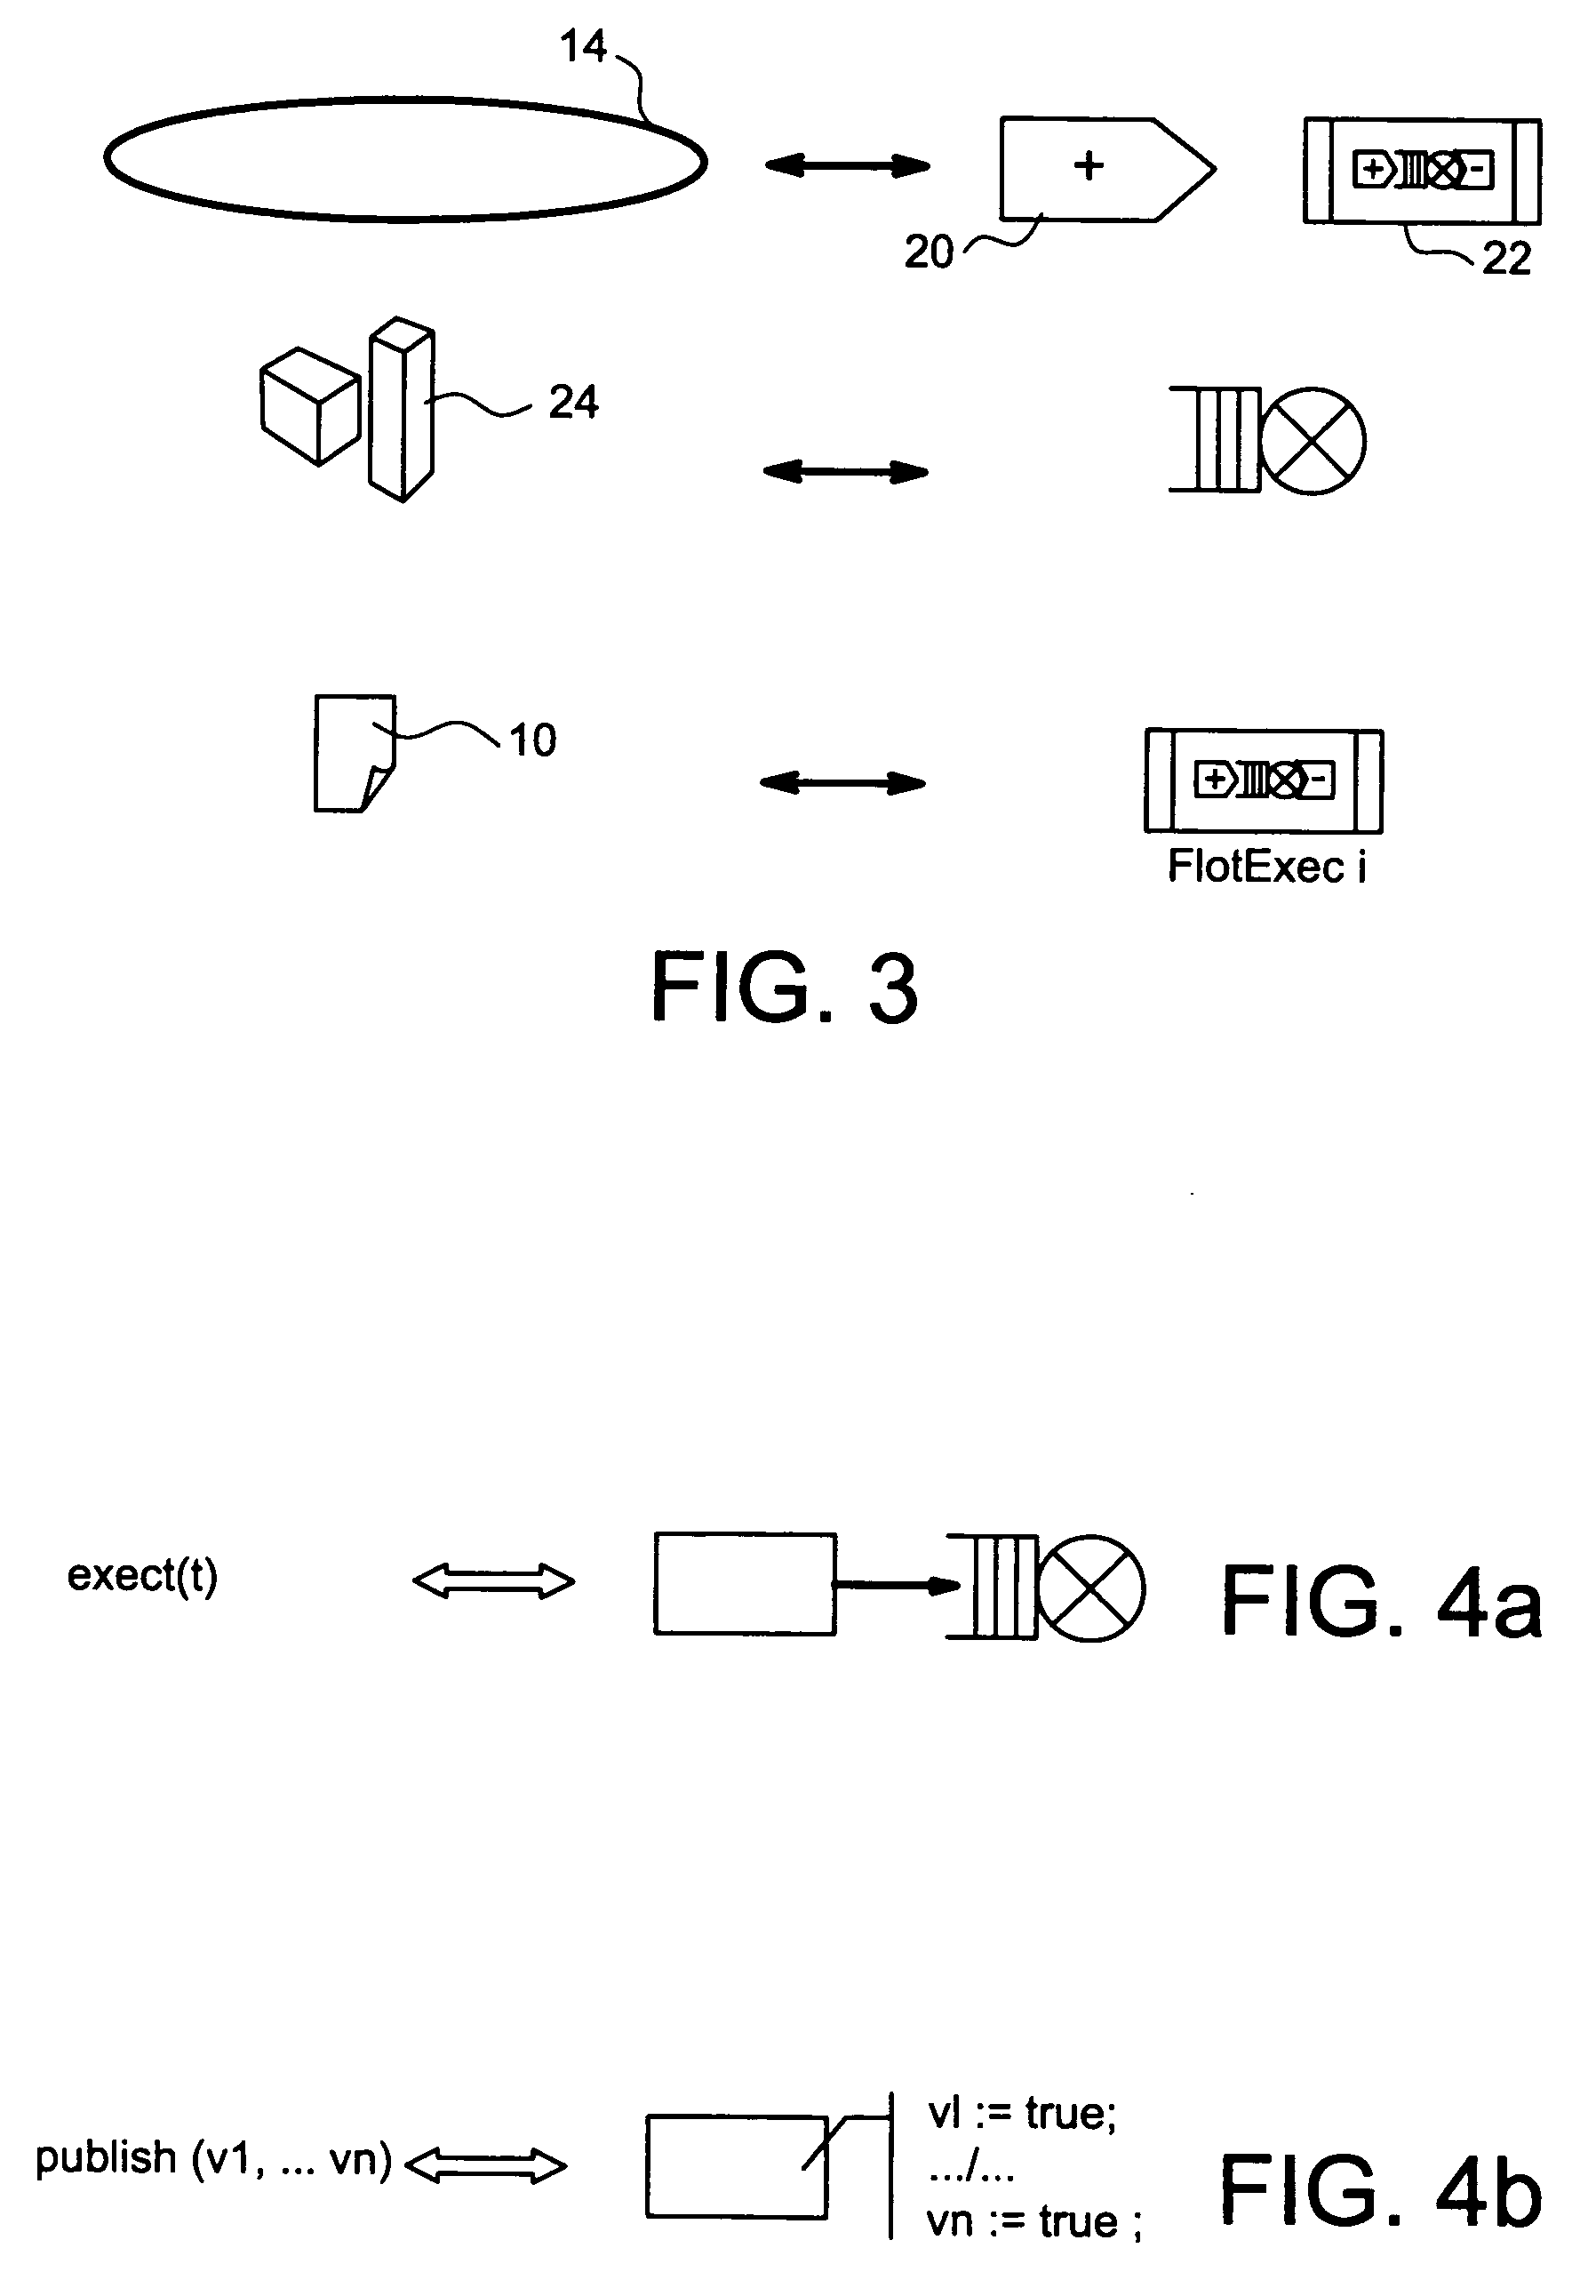 Method of generating a performance model from a functional model